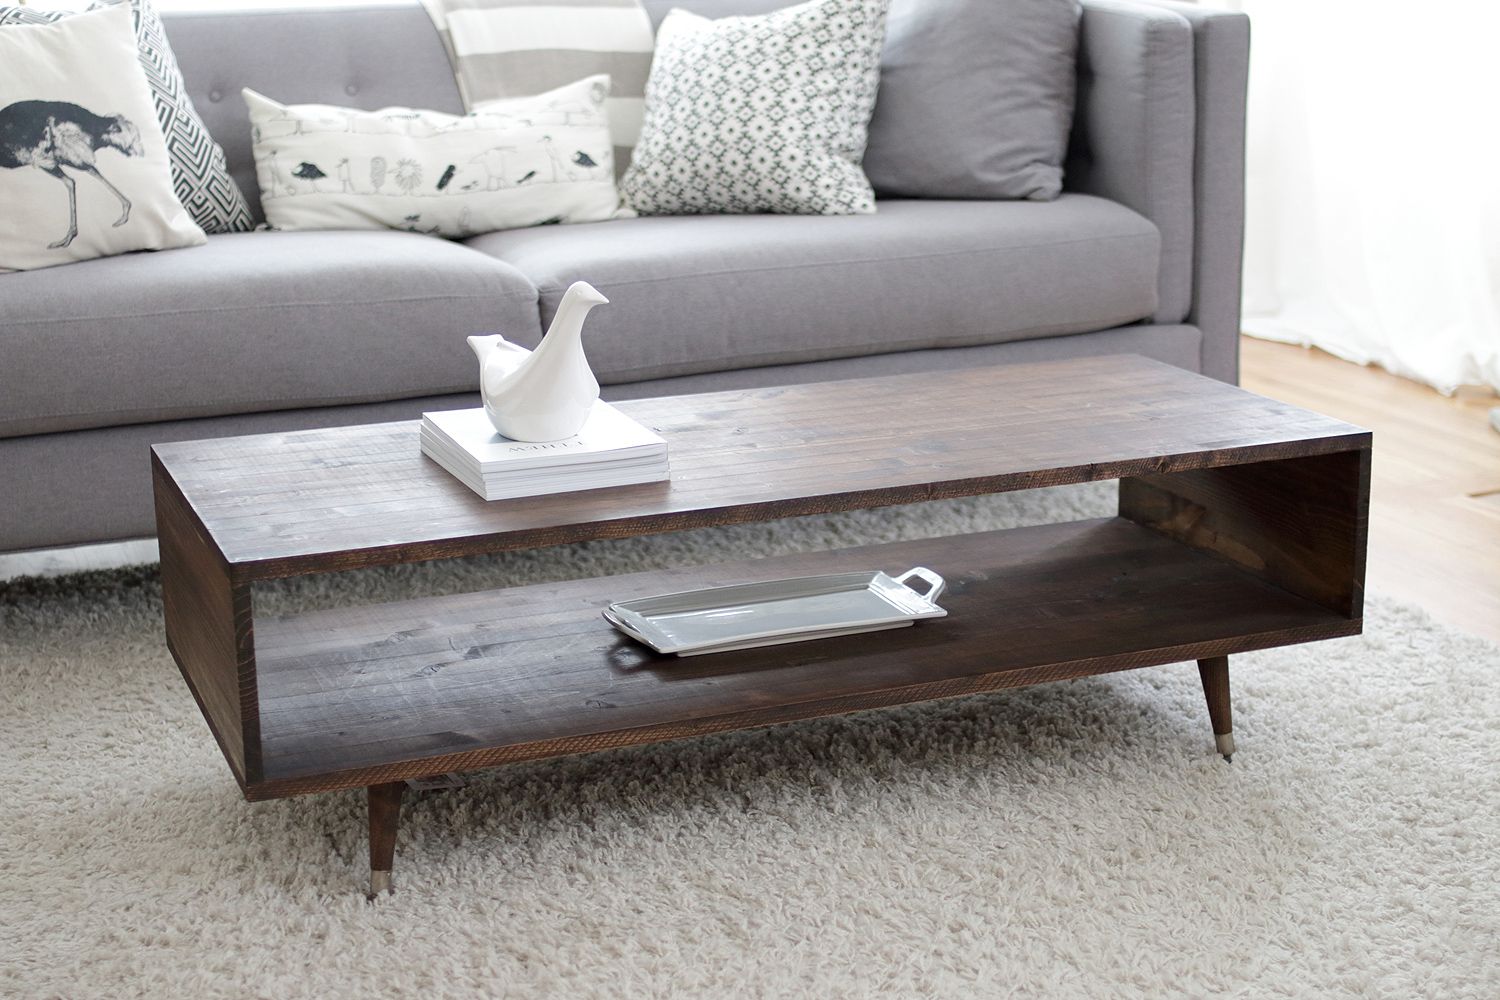 Build Your Own Mid Century Modern Coffee Table For $60 – Bay On A Budget Within Wooden Mid Century Coffee Tables (View 15 of 15)